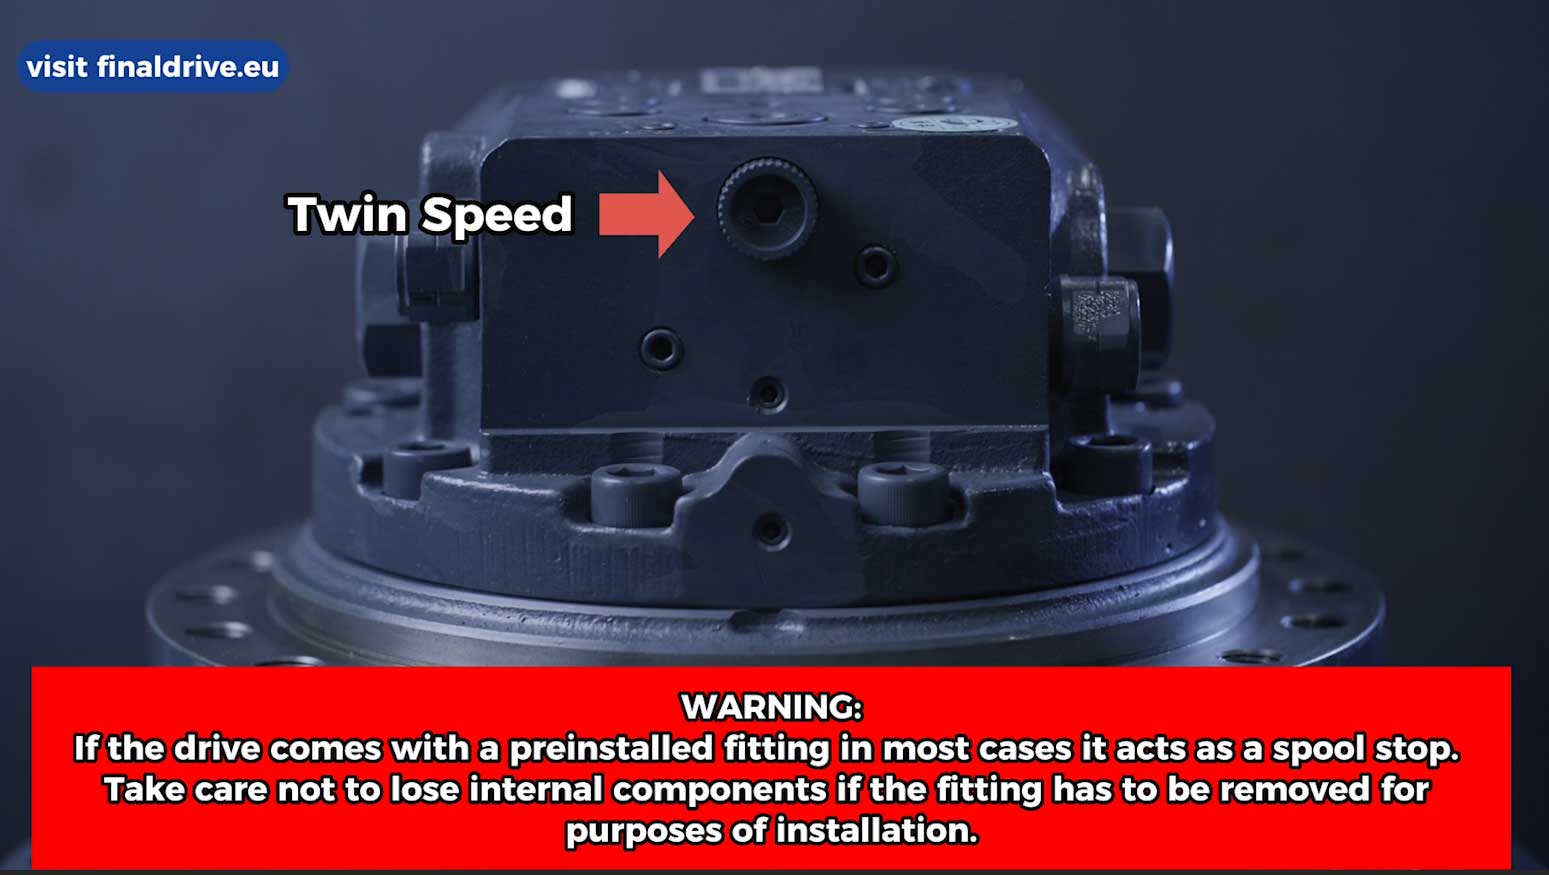 Twin Speed Warning - If the drive comes with a preinstalled fitting in most cases it acts as a spool stop. Take care not to lose internal components if the fitting has to be removed for purposes of installation.